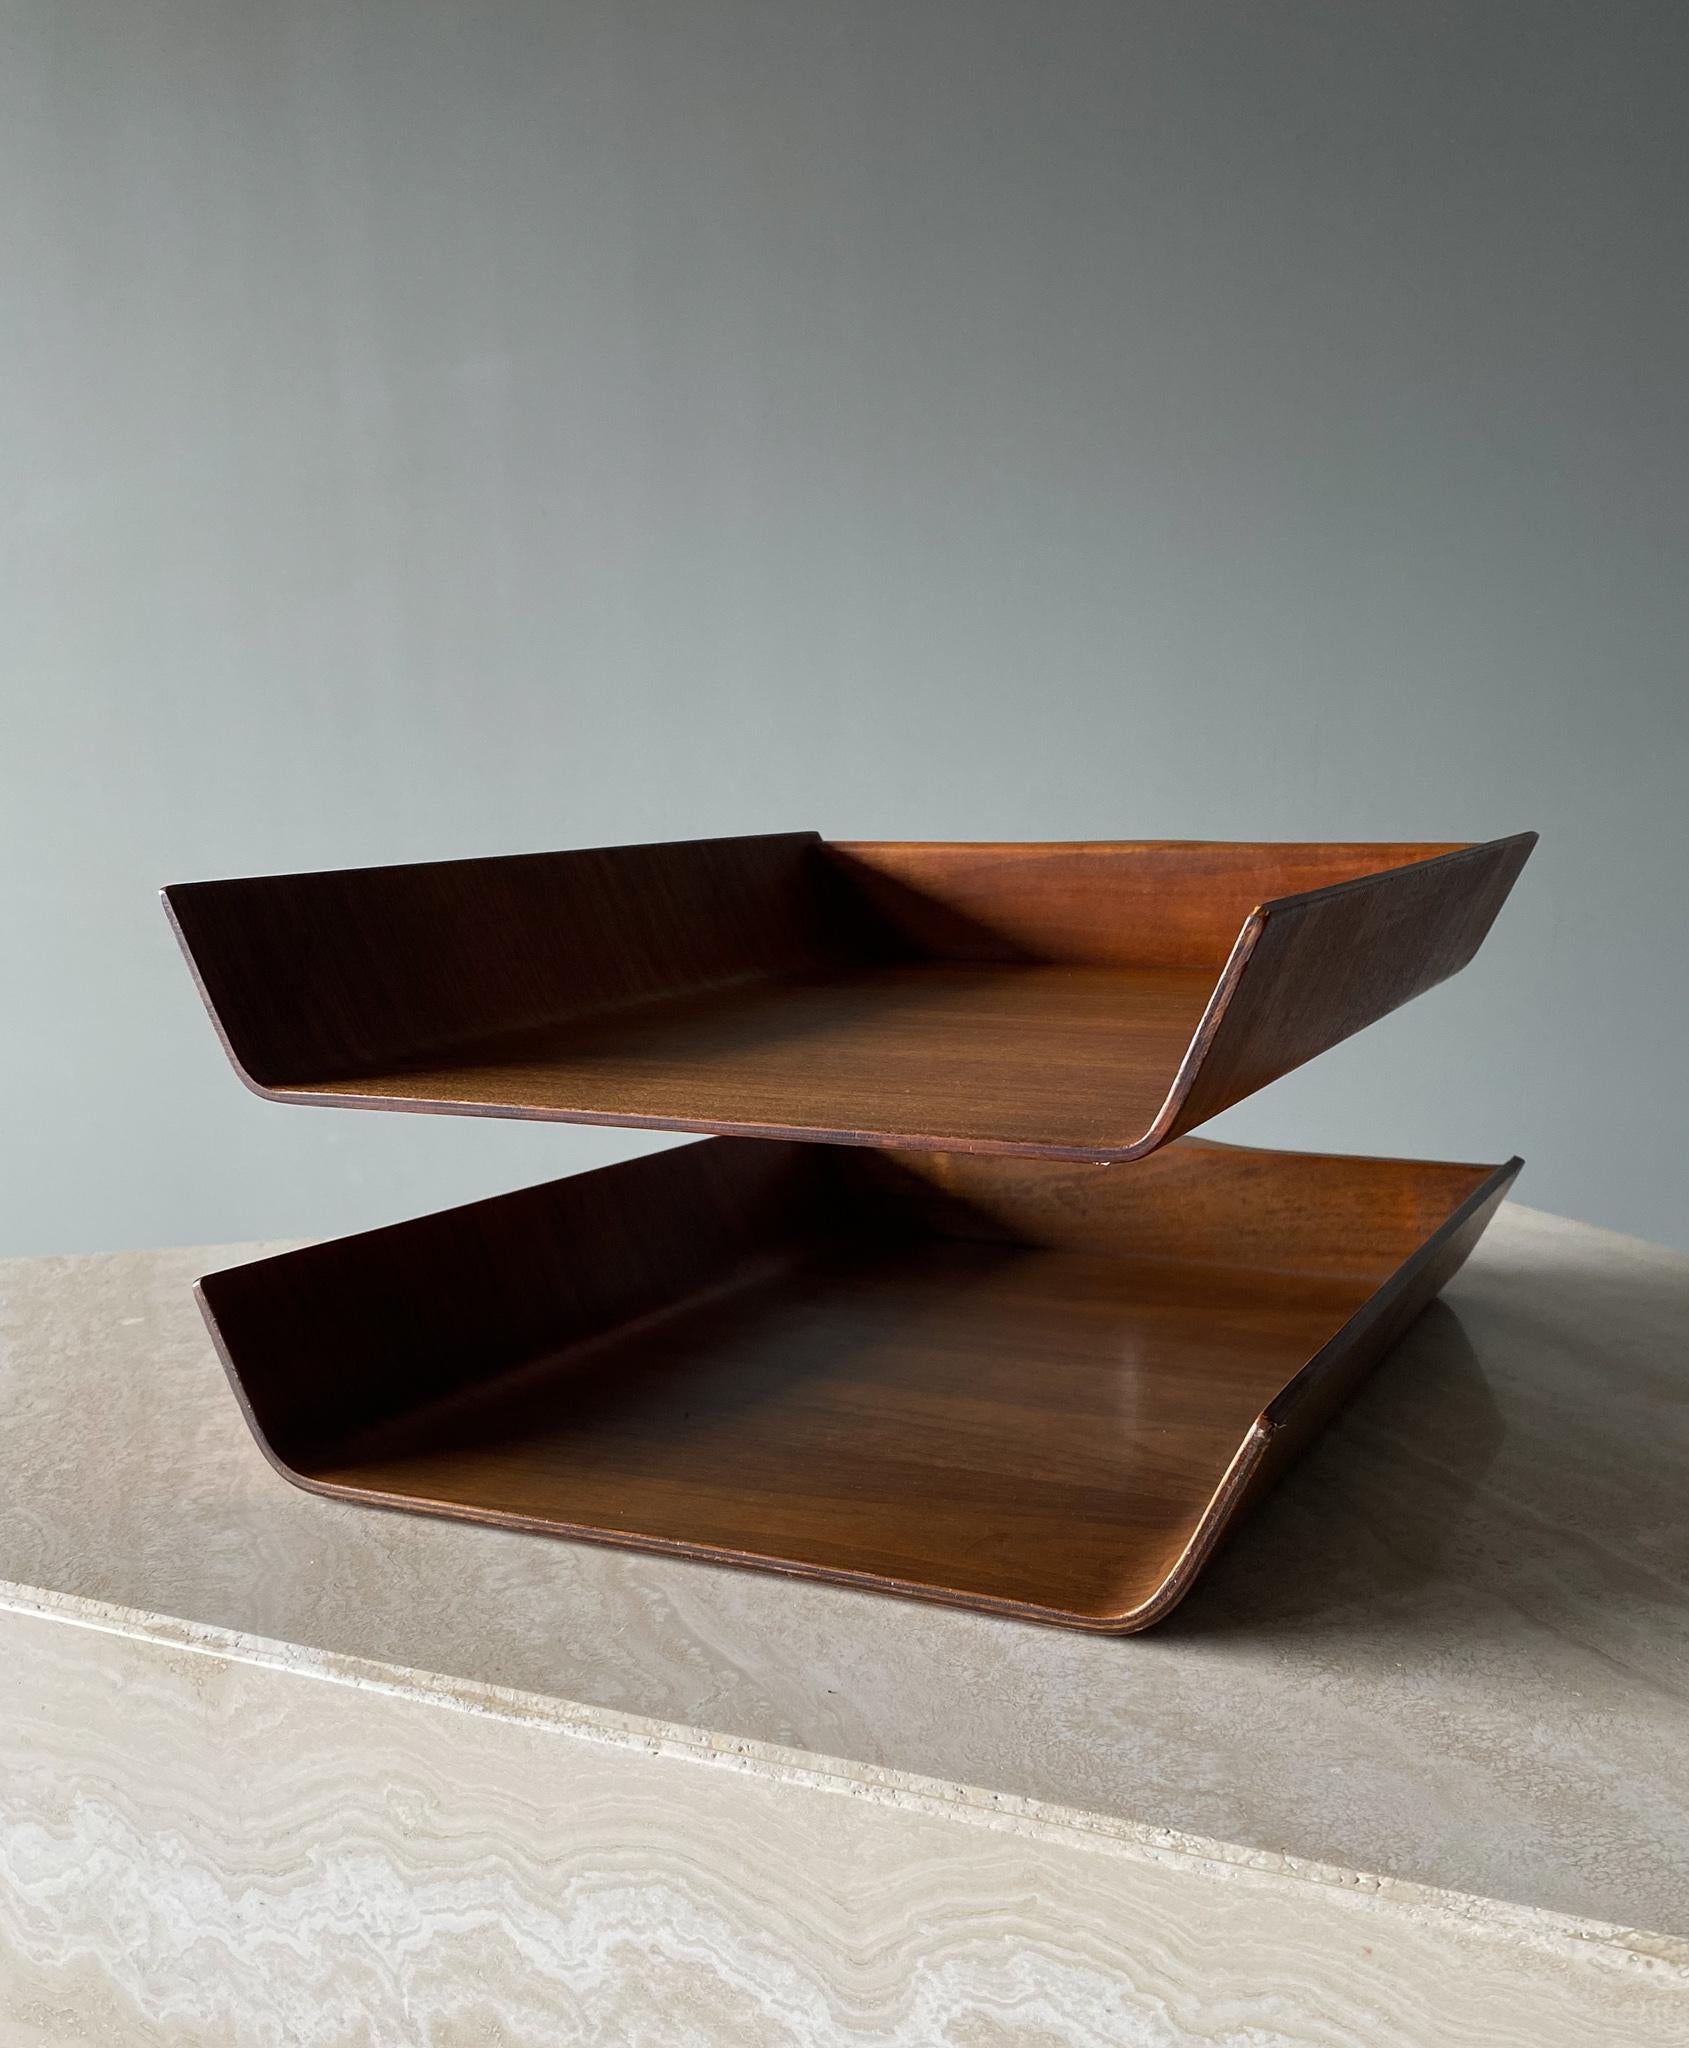 Walnut Florence Knoll Molded Plywood Architectural Letter Tray, 1960s For Sale